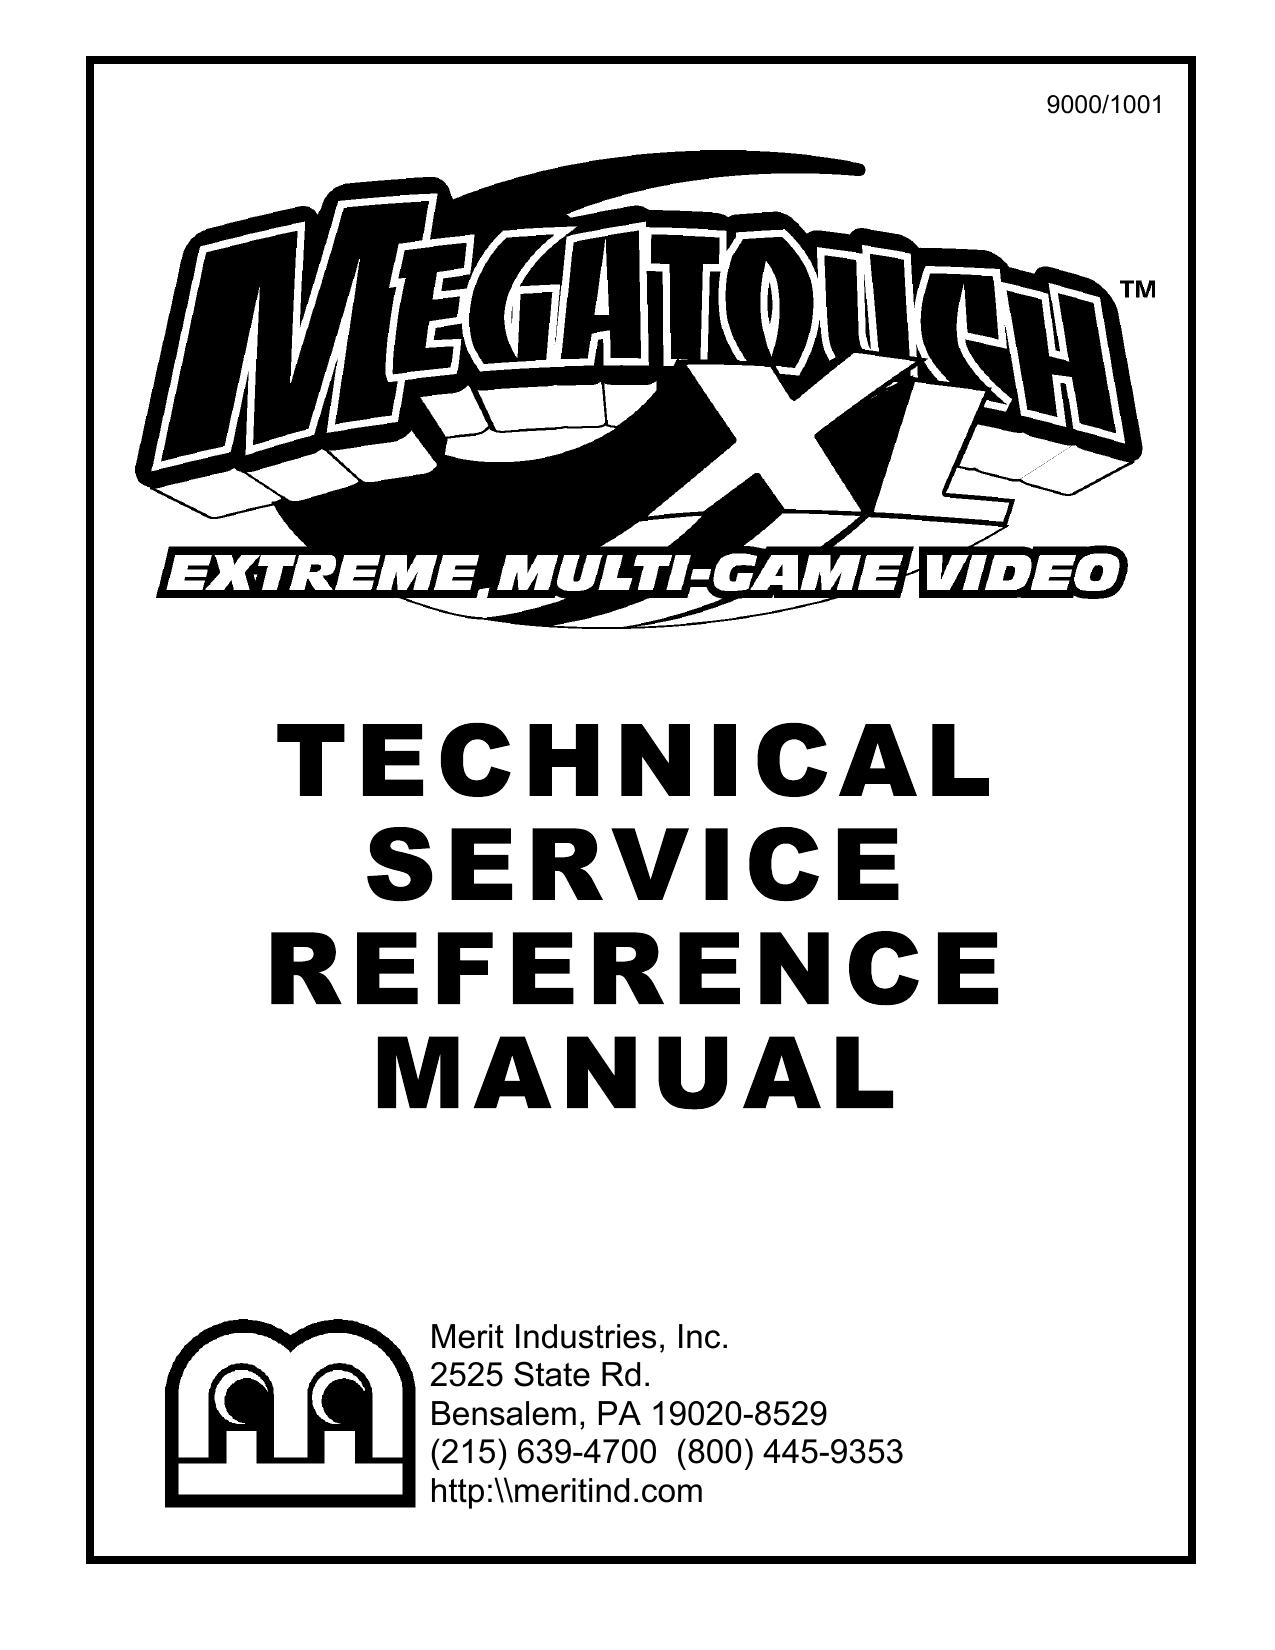 Microsoft Word - Megatouch XL Technical Reference Manual.doc